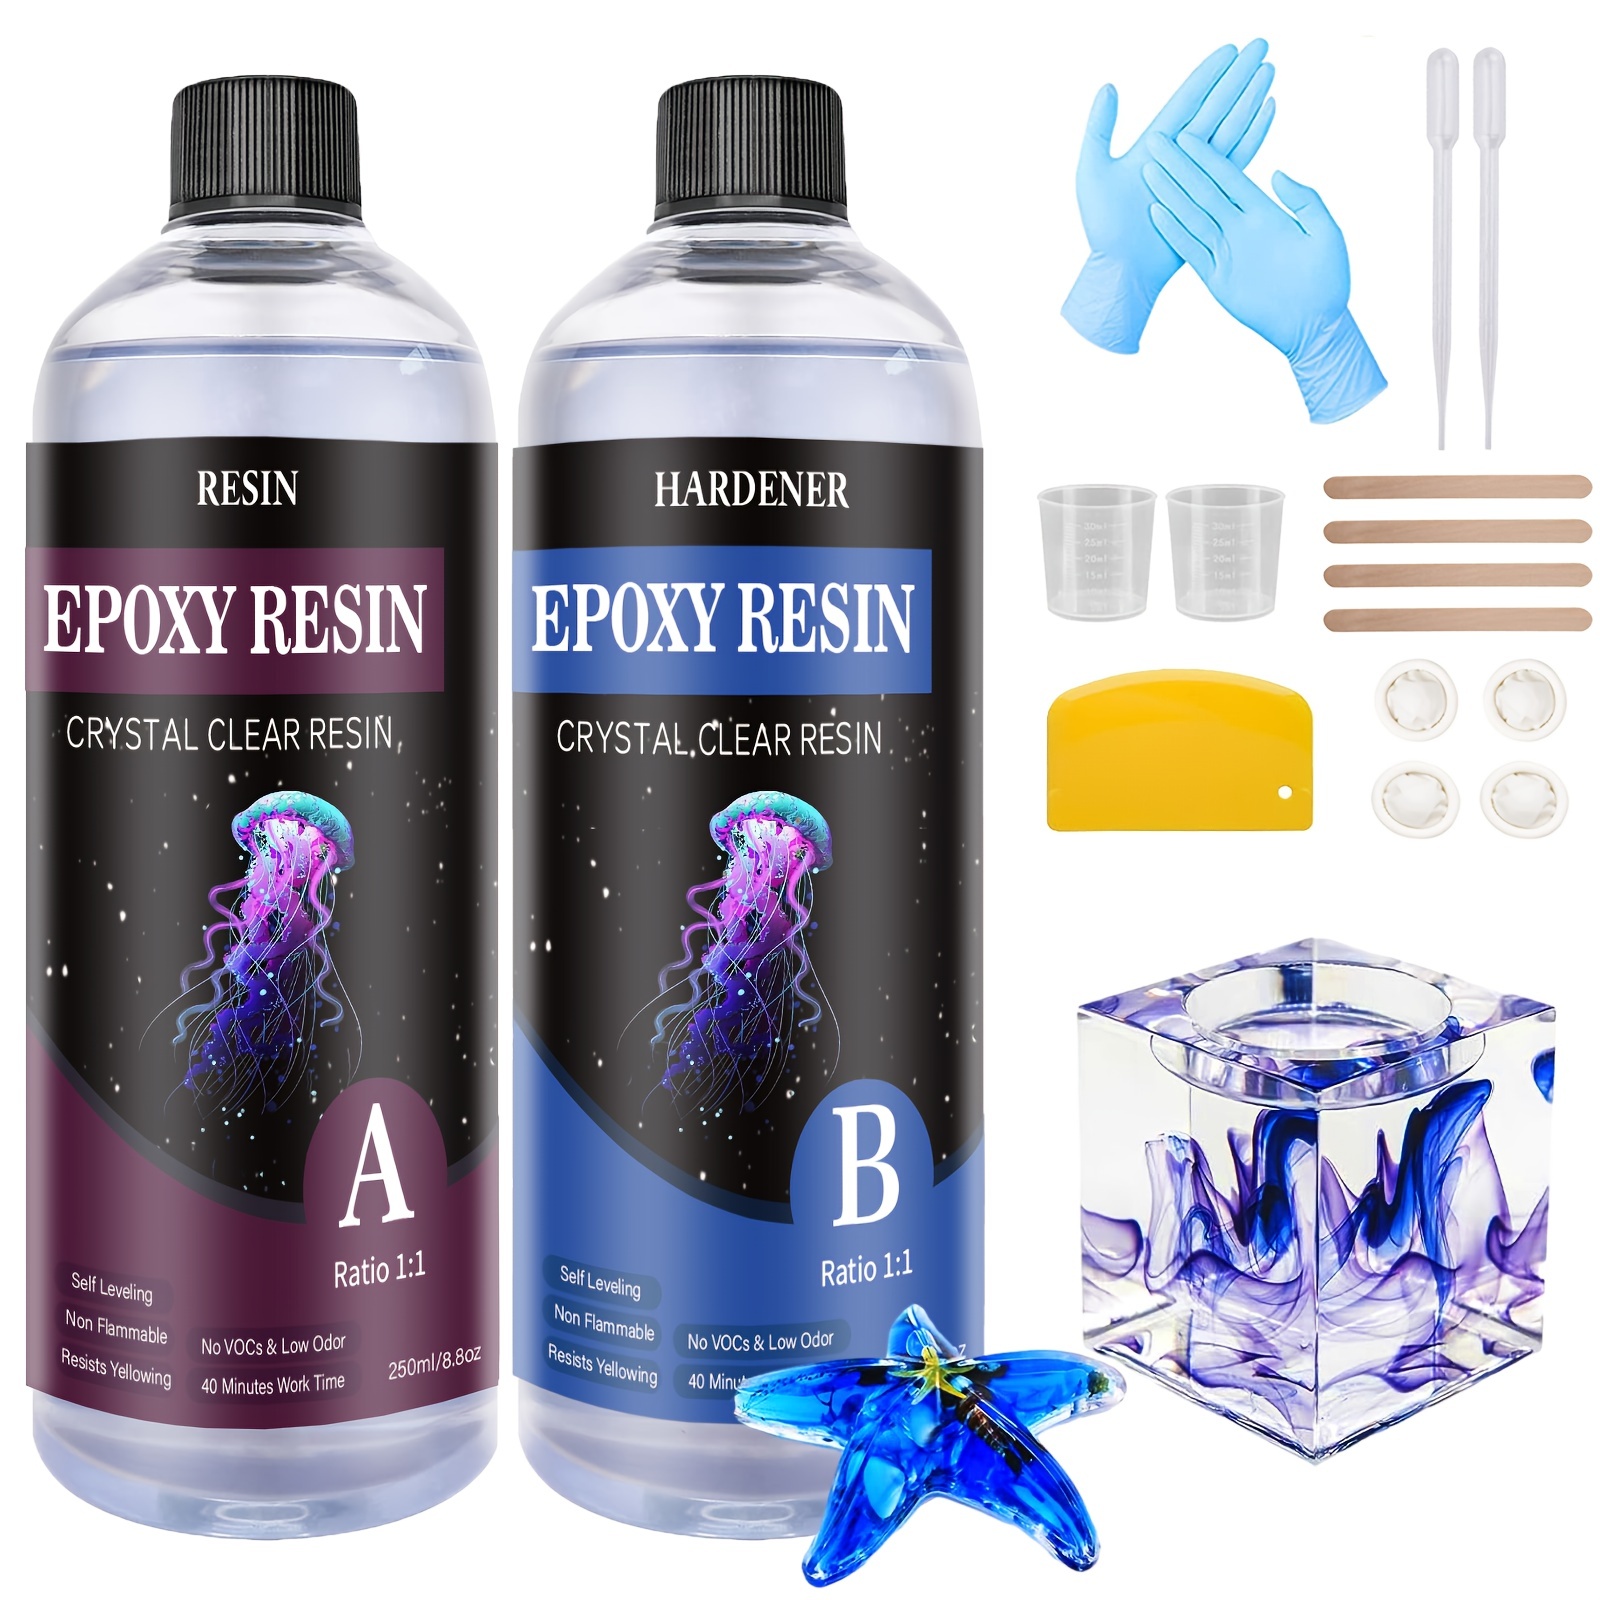  Epoxy Resin Crystal Clear Kit for Art, Jewelry, Crafts